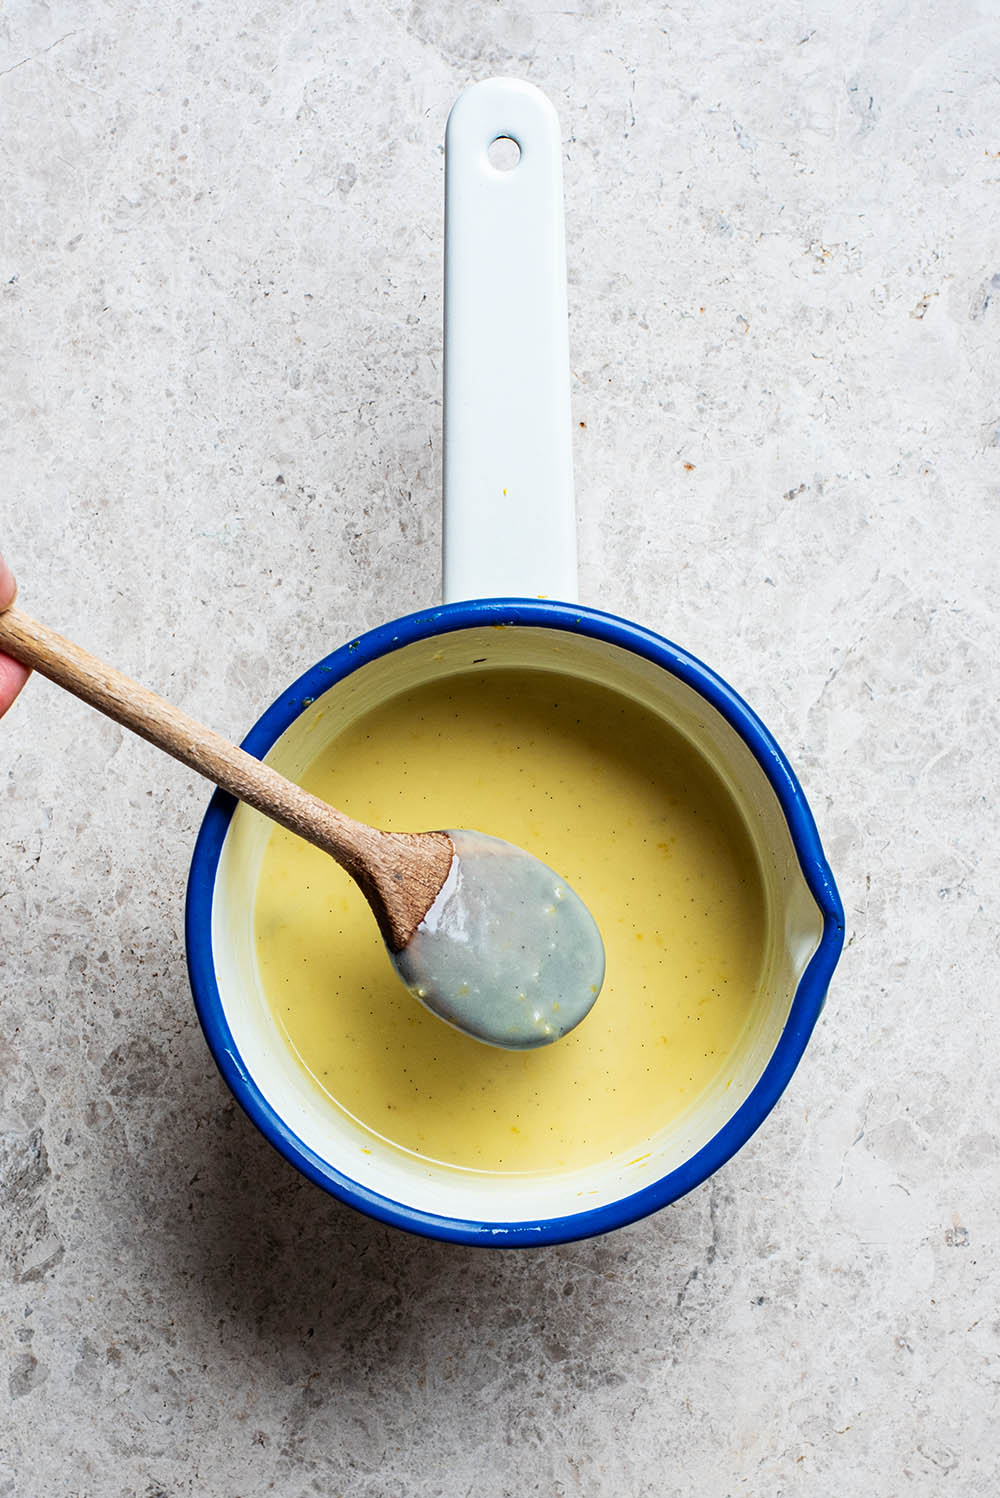 Wooden spoon dipped into the custard to show coating.